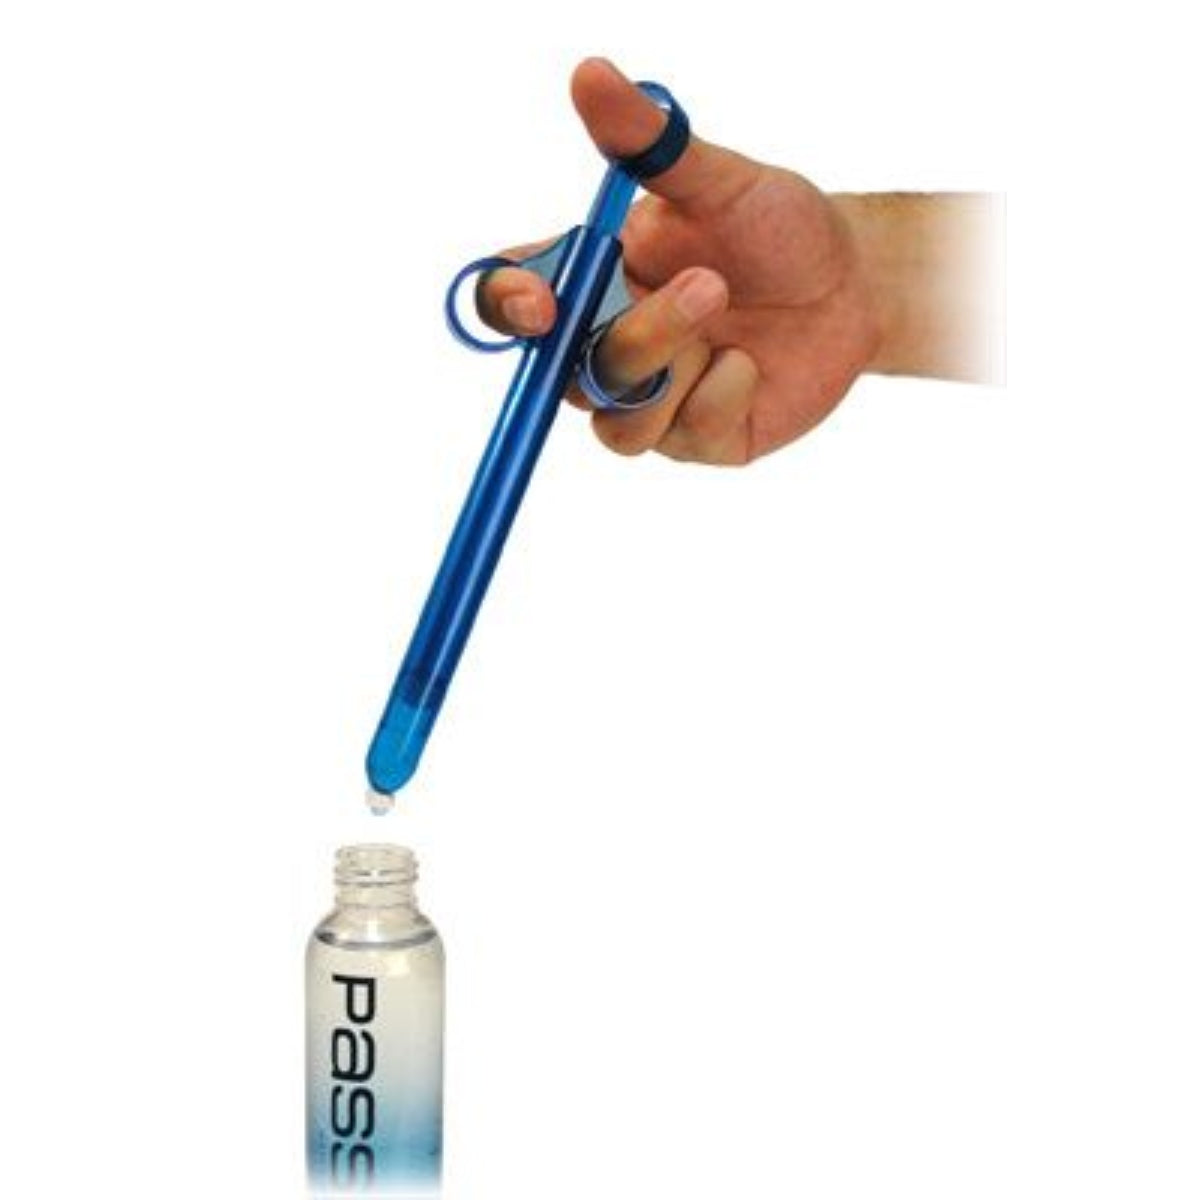 Cleanstream One Shot Lube Launcher Blue - Simply Pleasure